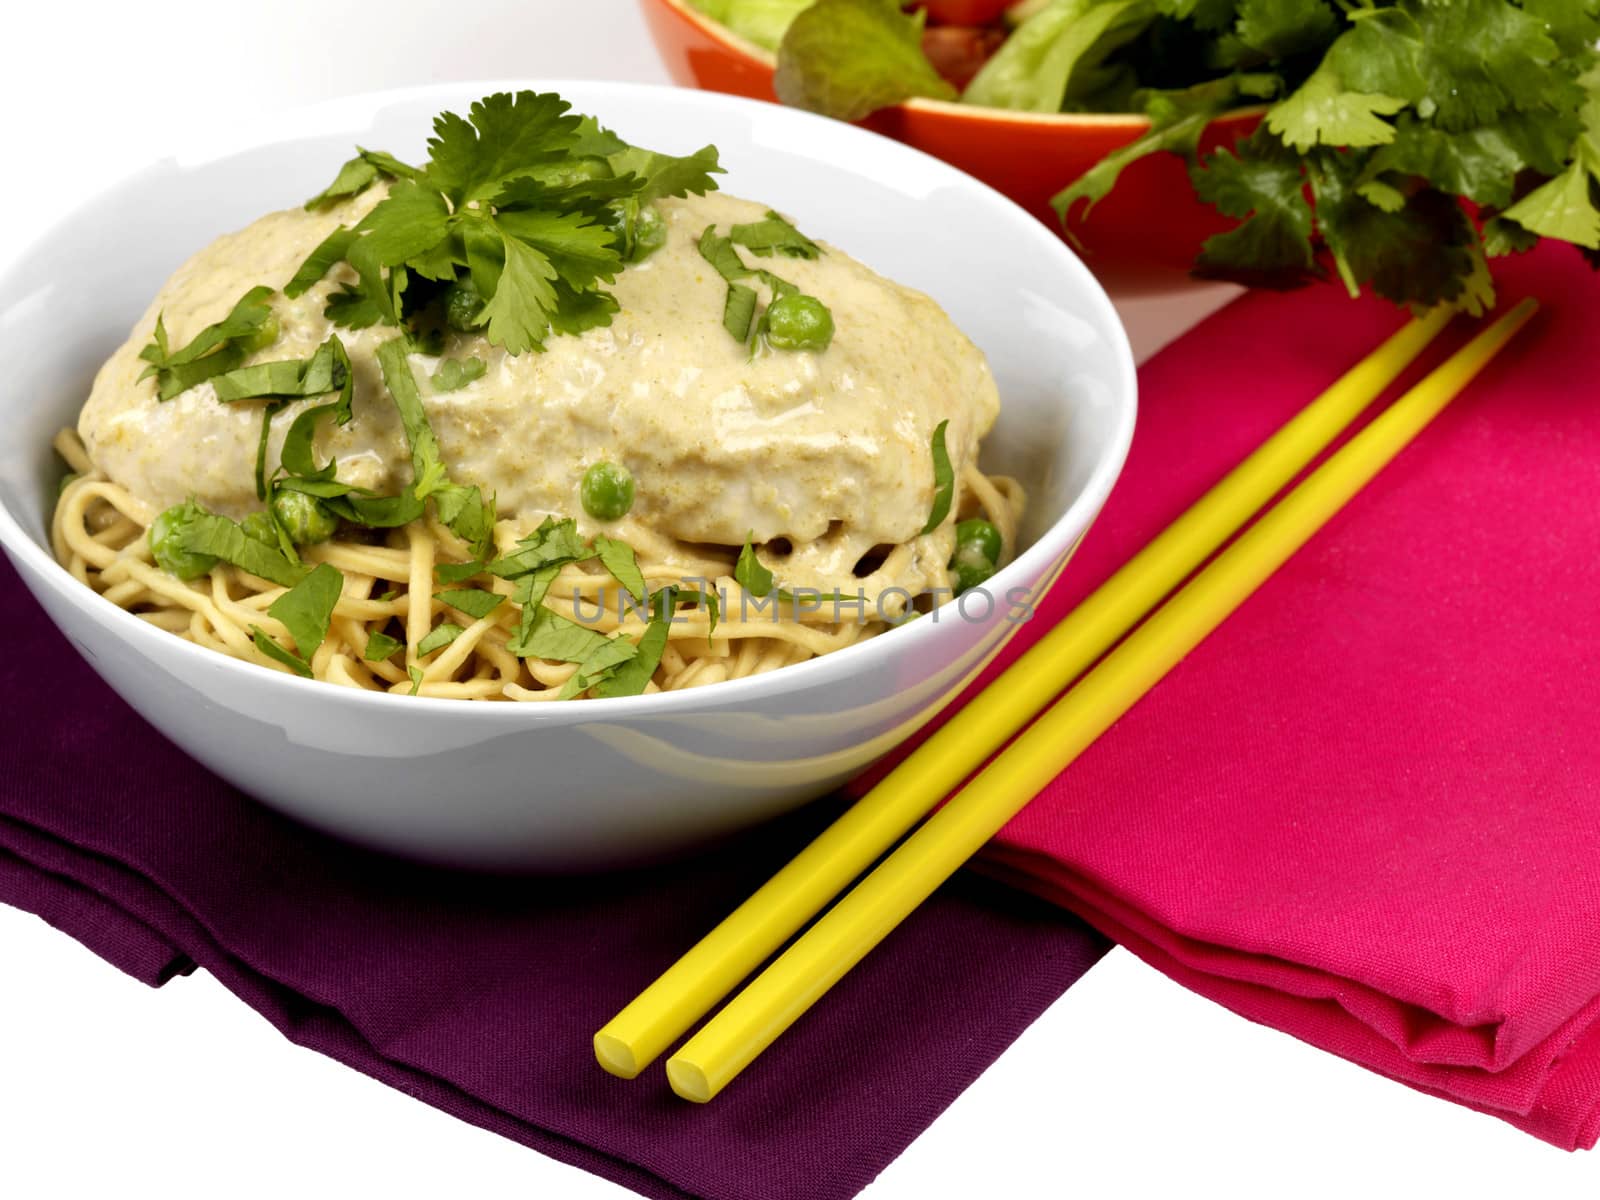 Thai Cod with Noodles by Whiteboxmedia